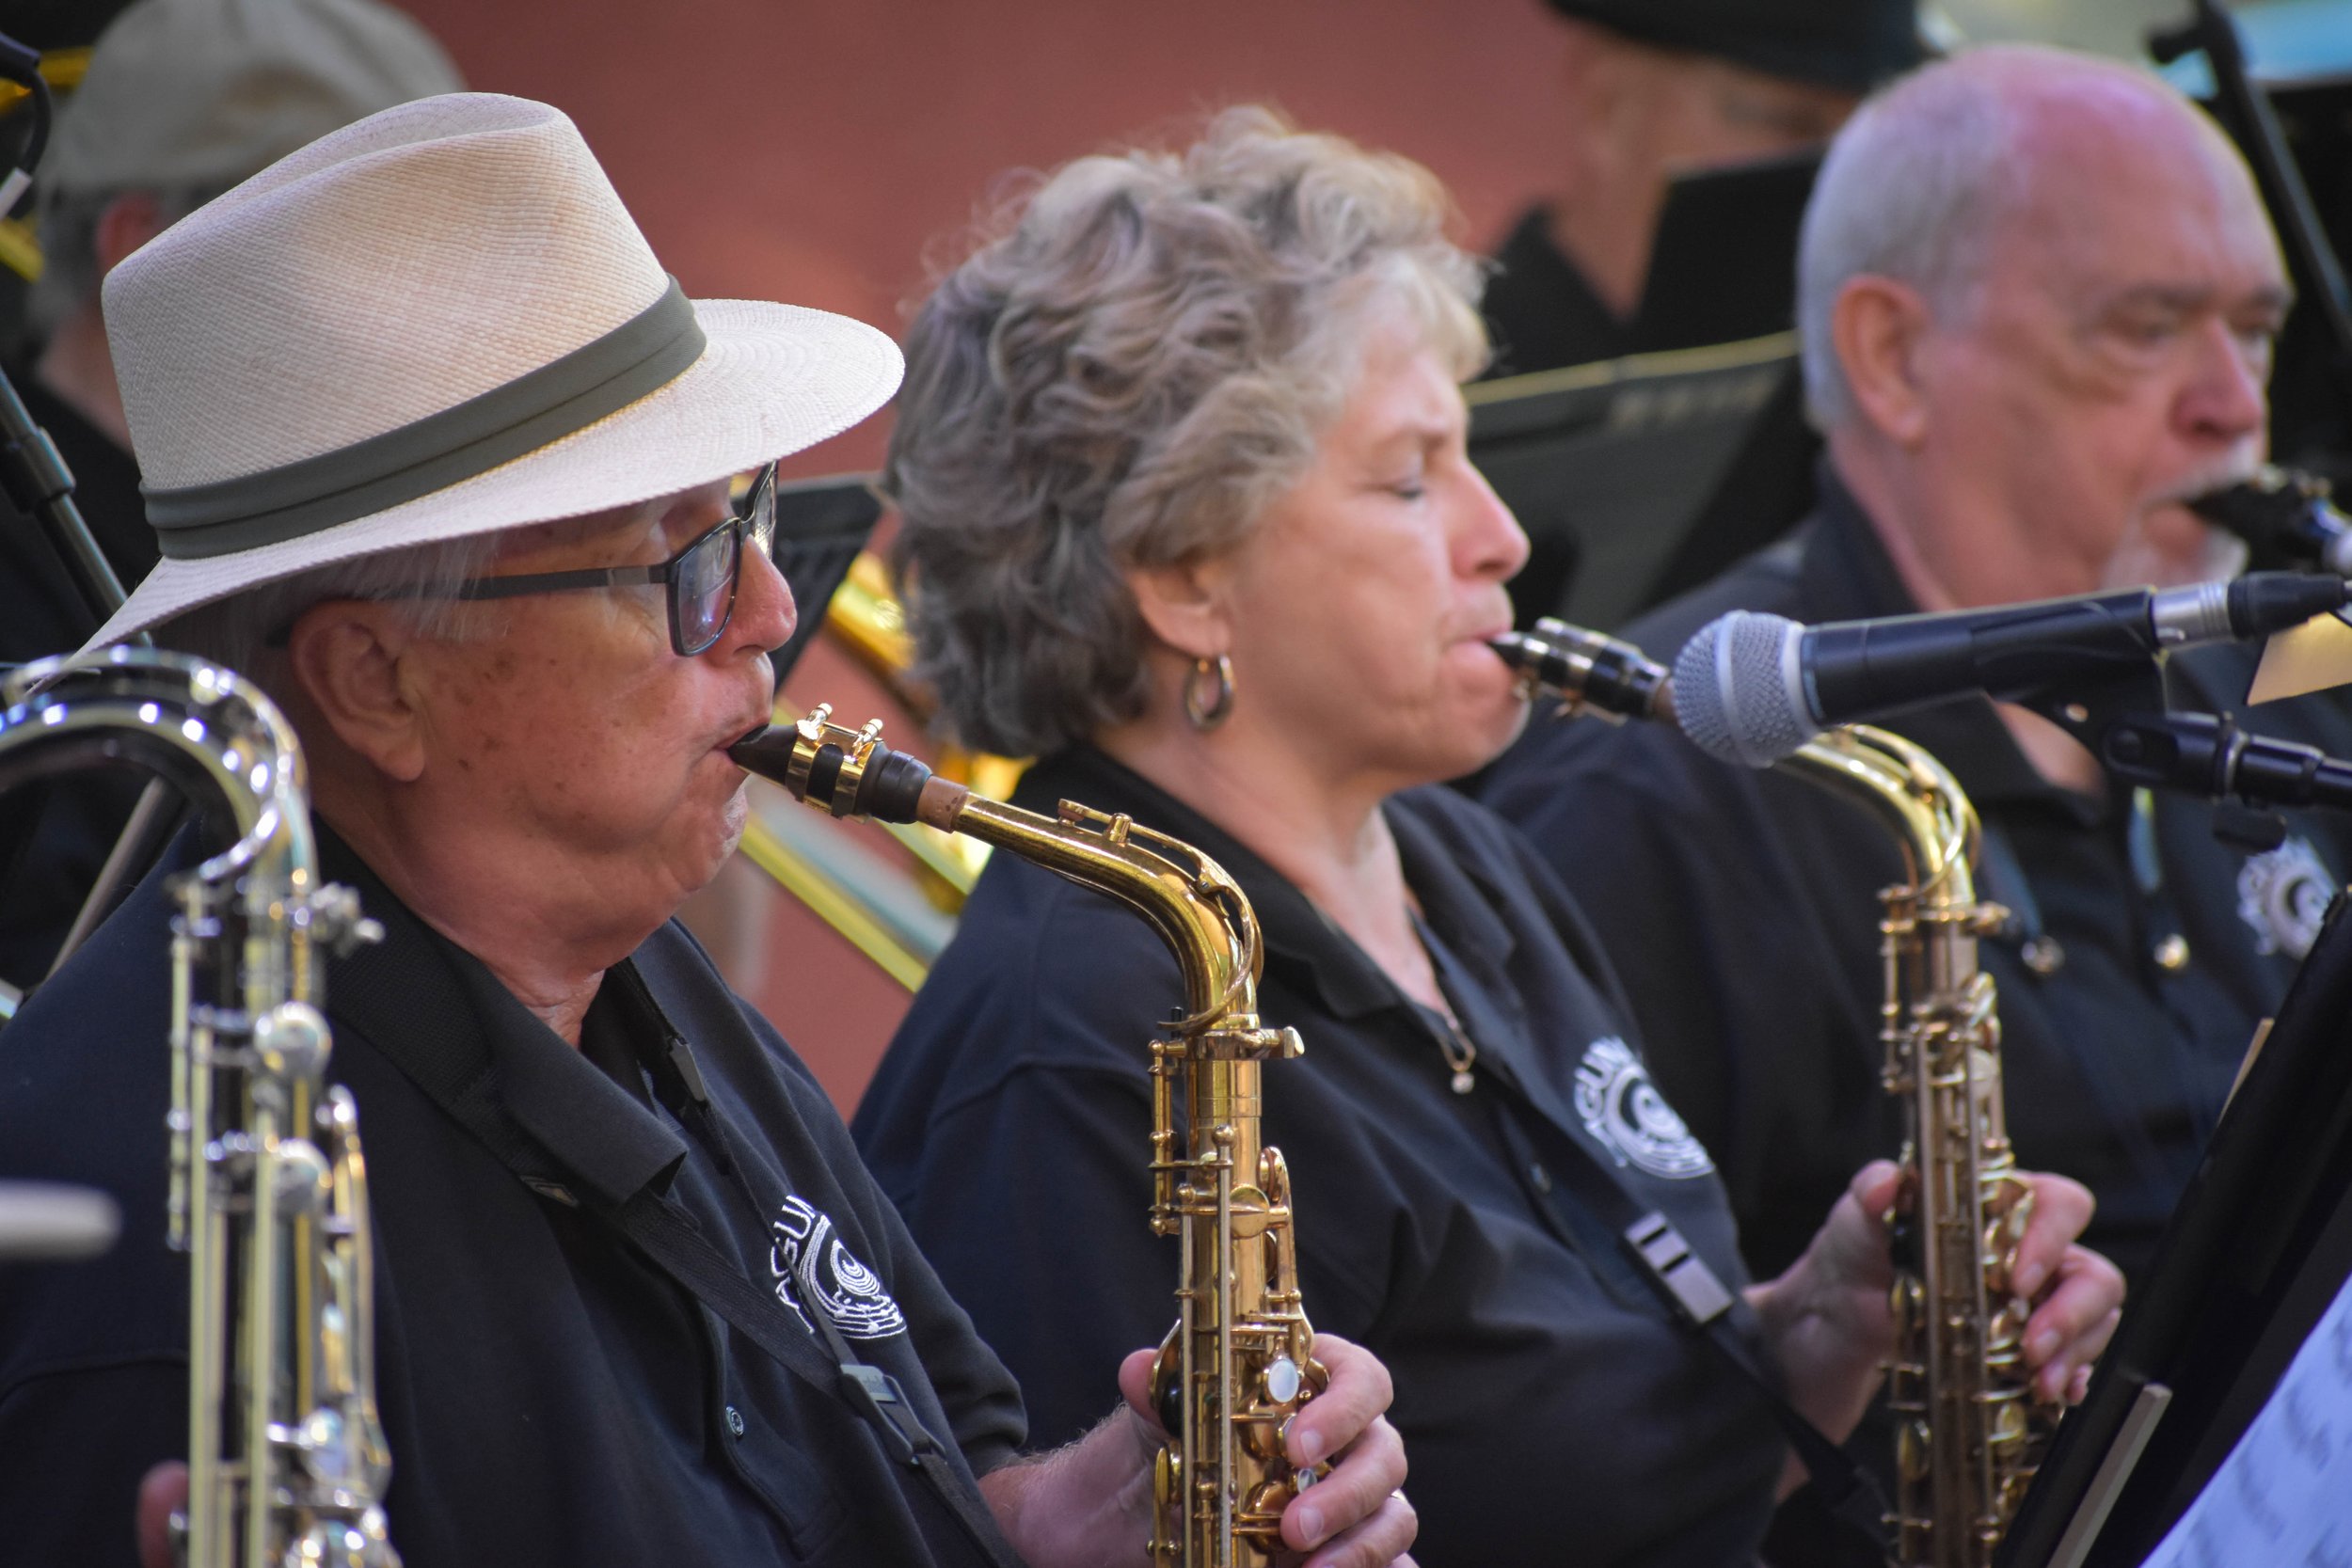 07-10-2023 Laguna Jazz Band concert at Pageant of the Masters by Peyton Webster59-55.jpg